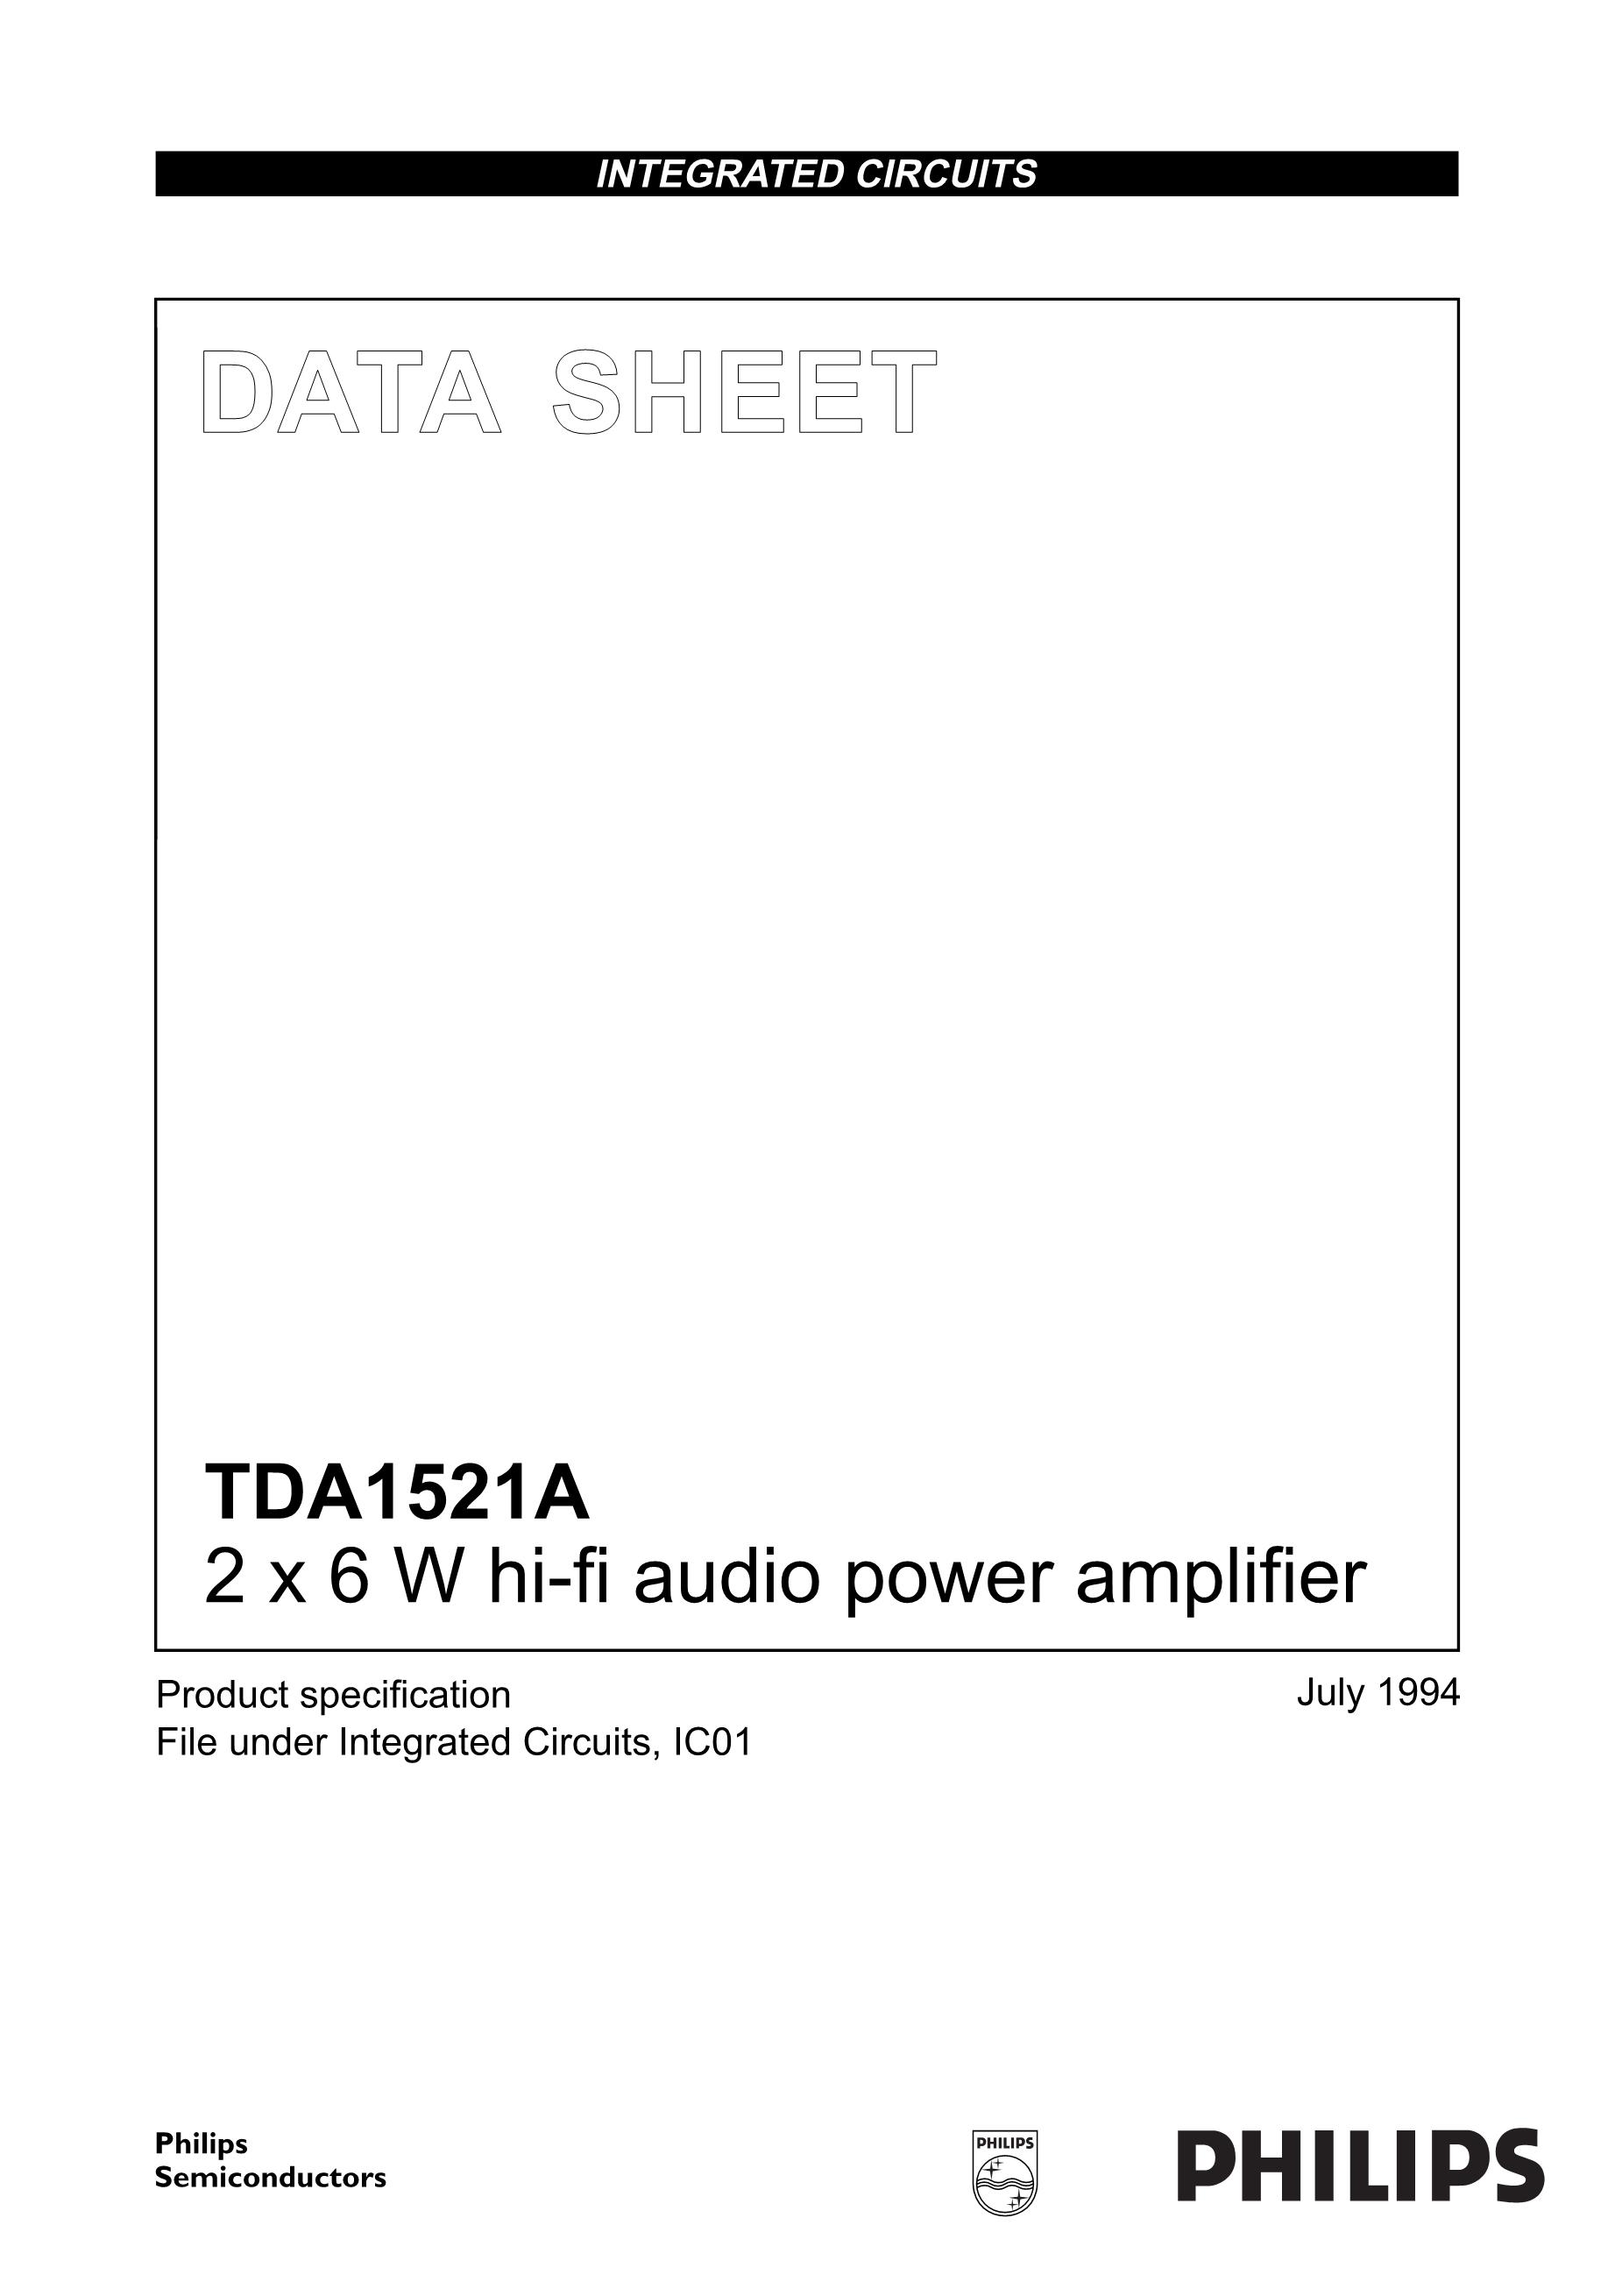 TDA1521A Price - TDA1521A in stock - Buy TDA1521A on Utsource.net